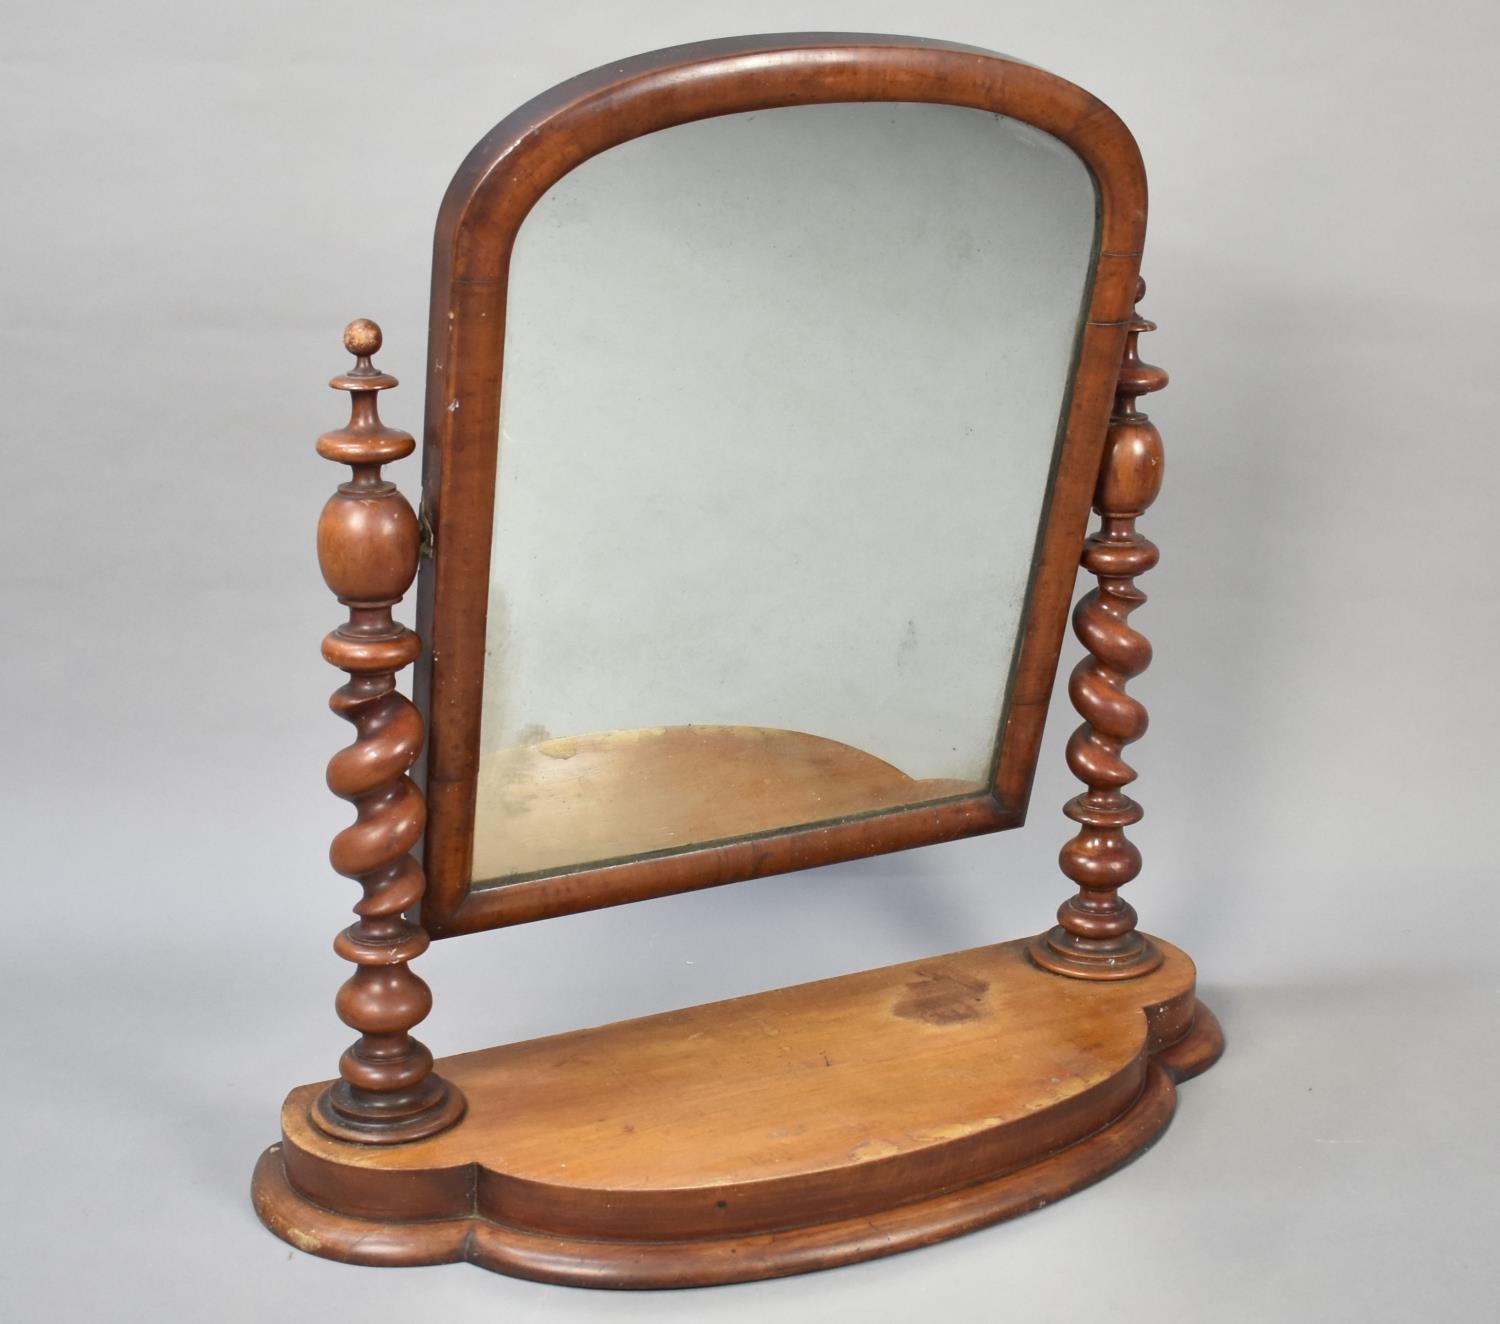 A Late Victorian Mahogany Swing Dressing Table Mirror with Barley Twist Supports and Serpentine